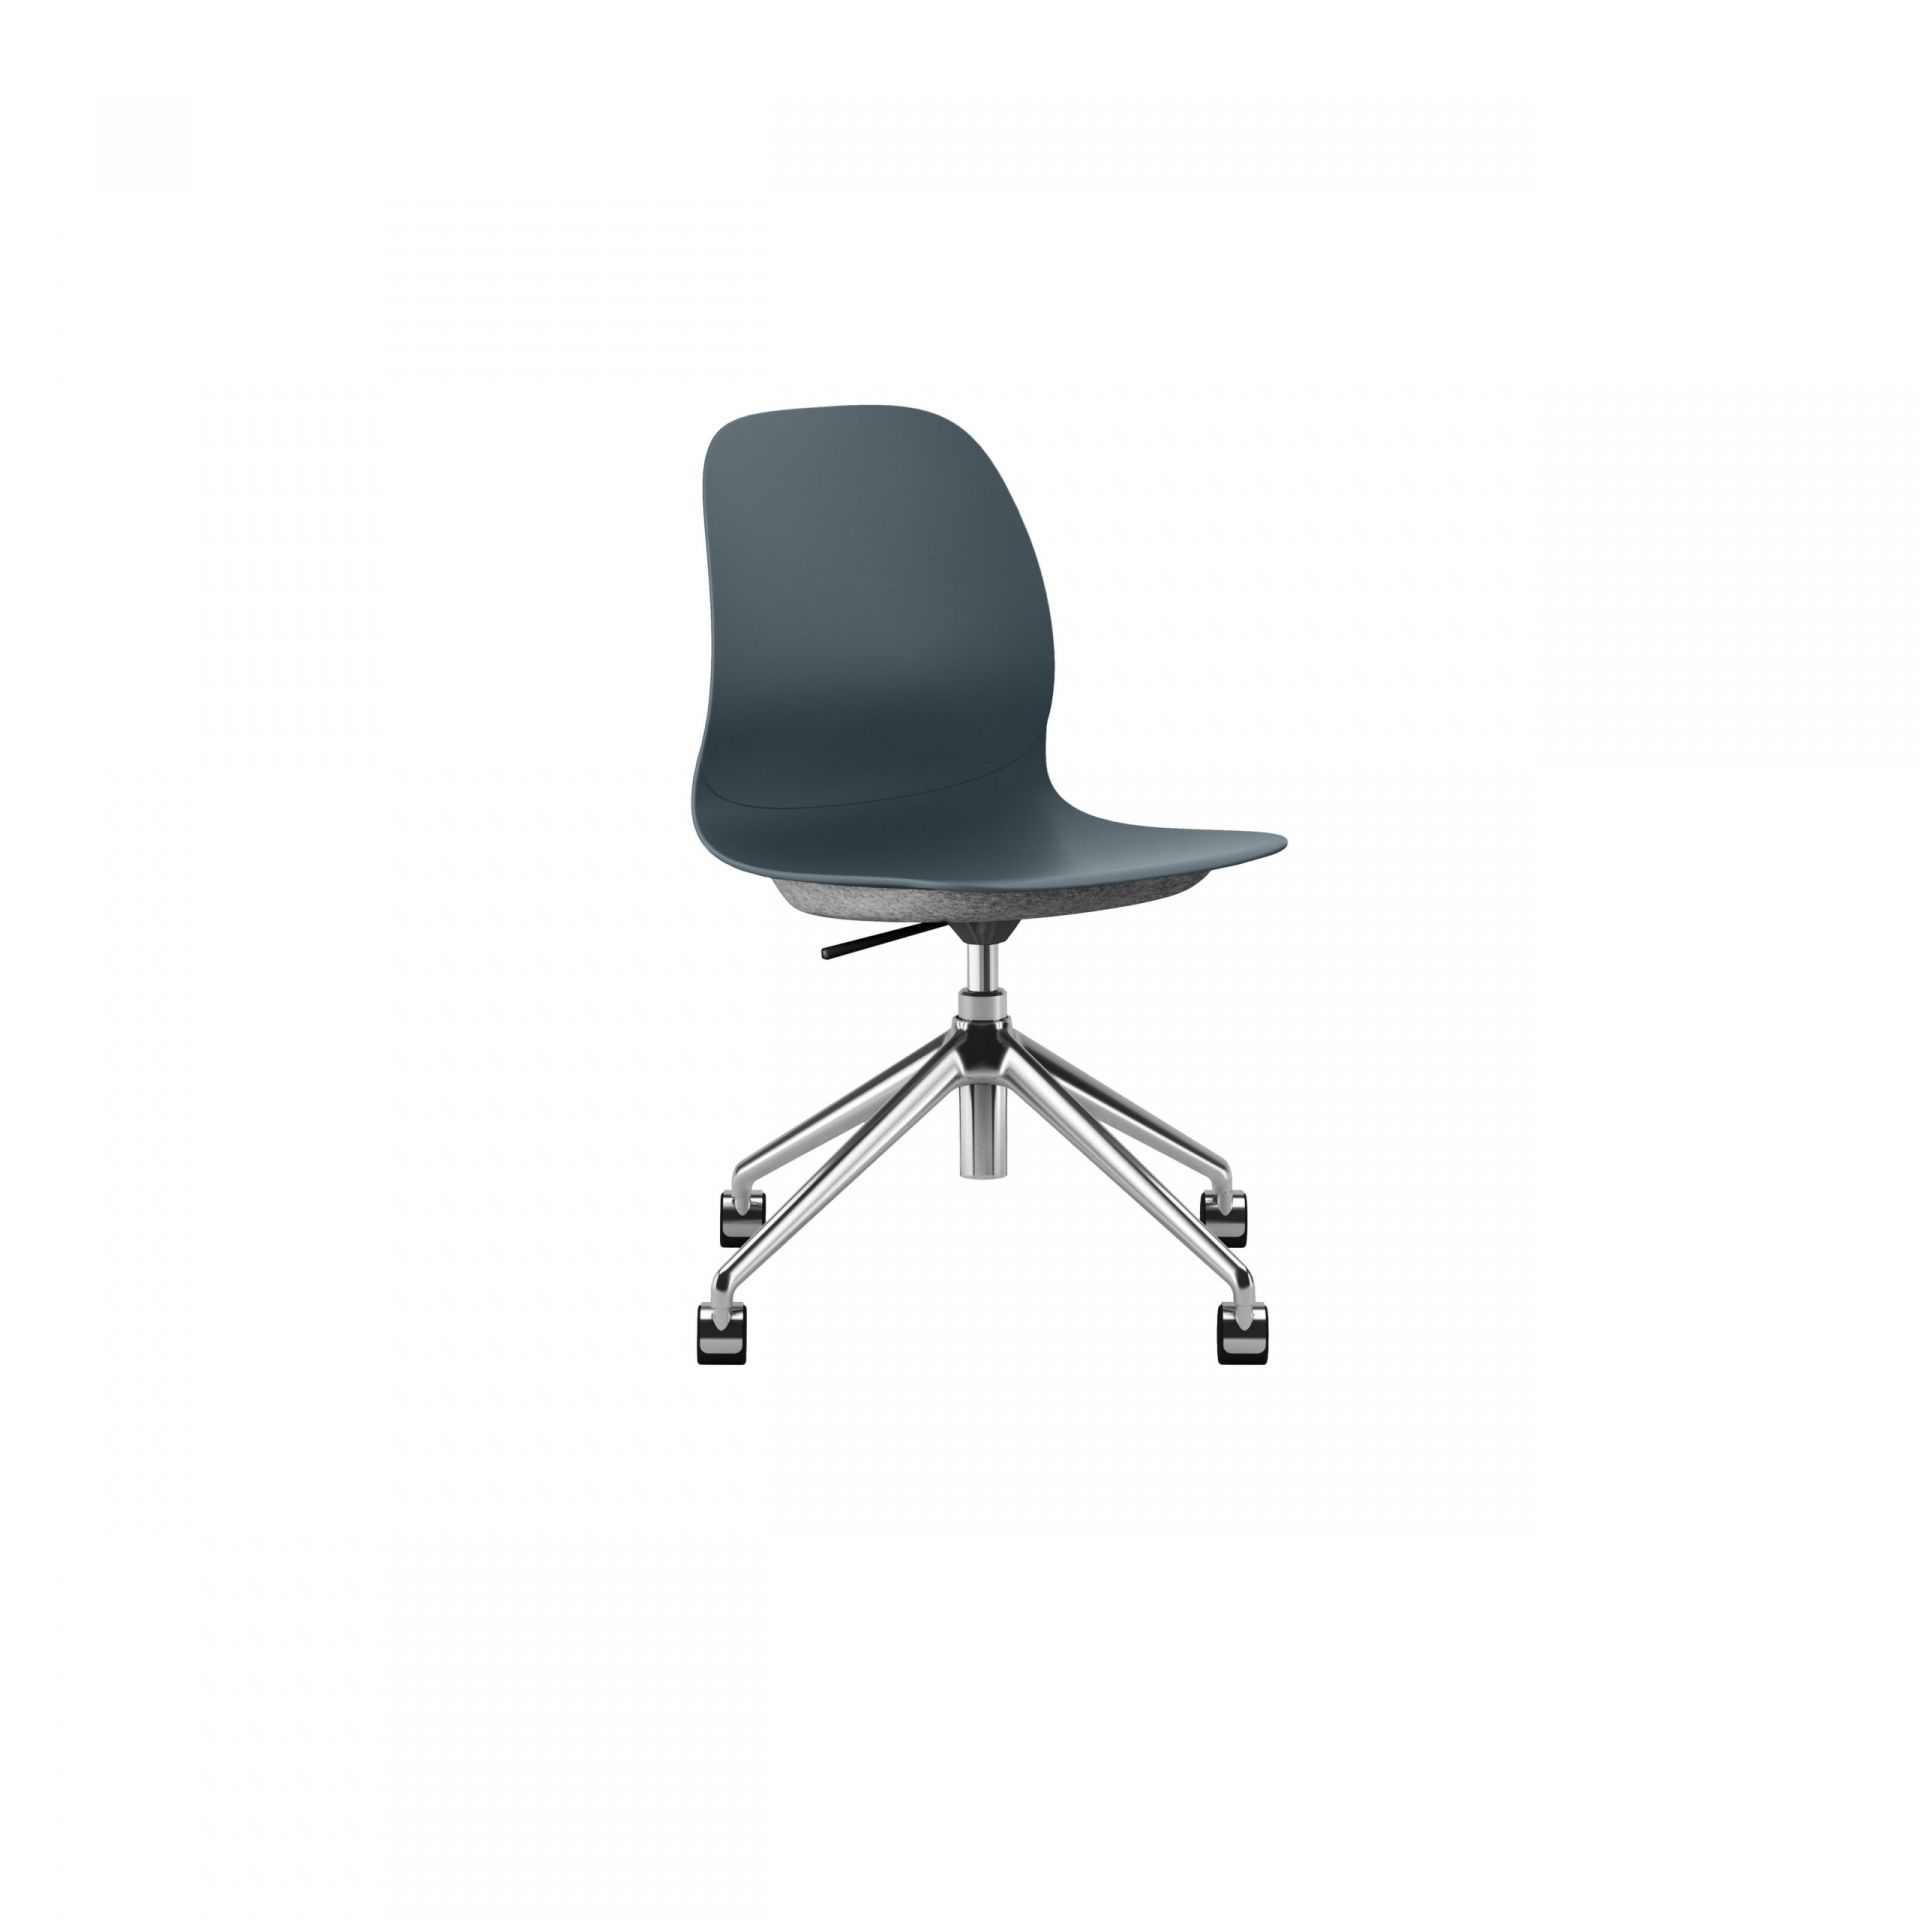 Archie Chair with 4-star swivel base